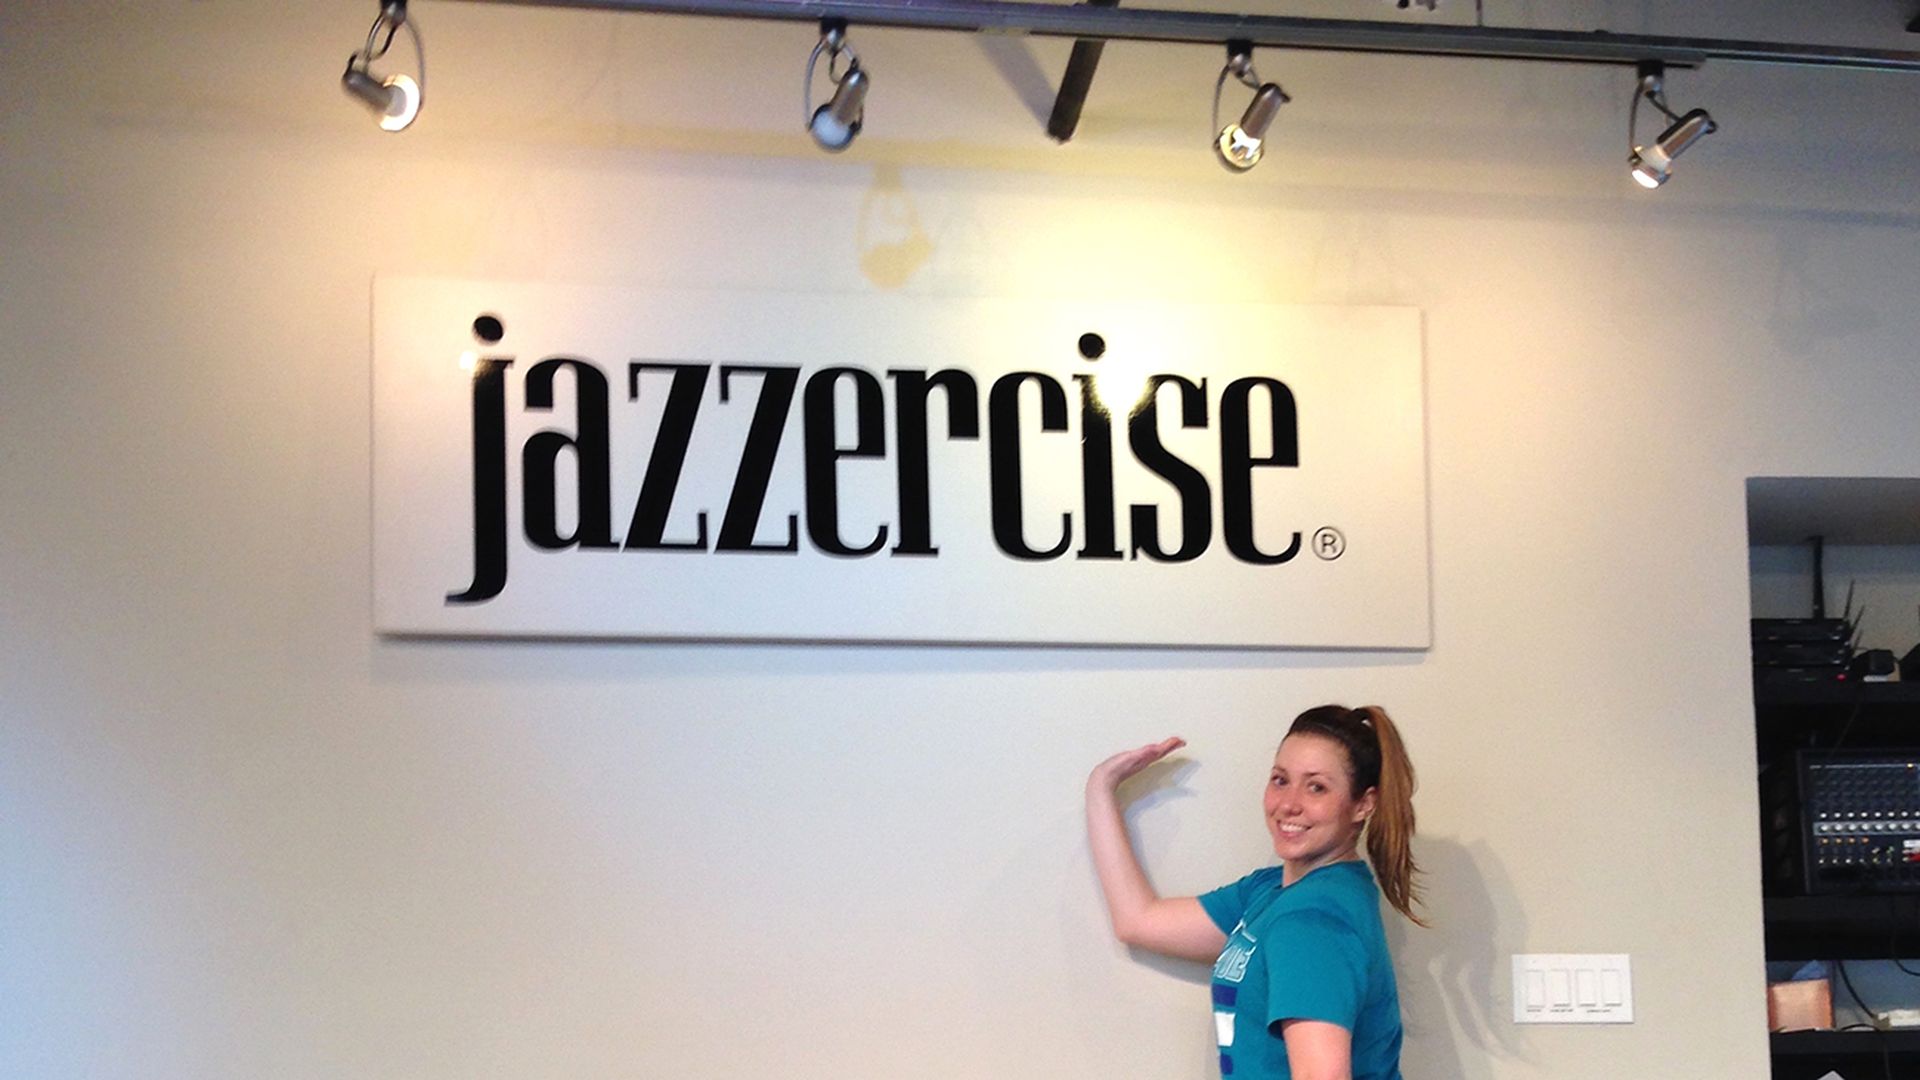 Breaking news: Jazzercise still exists - Axios Charlotte